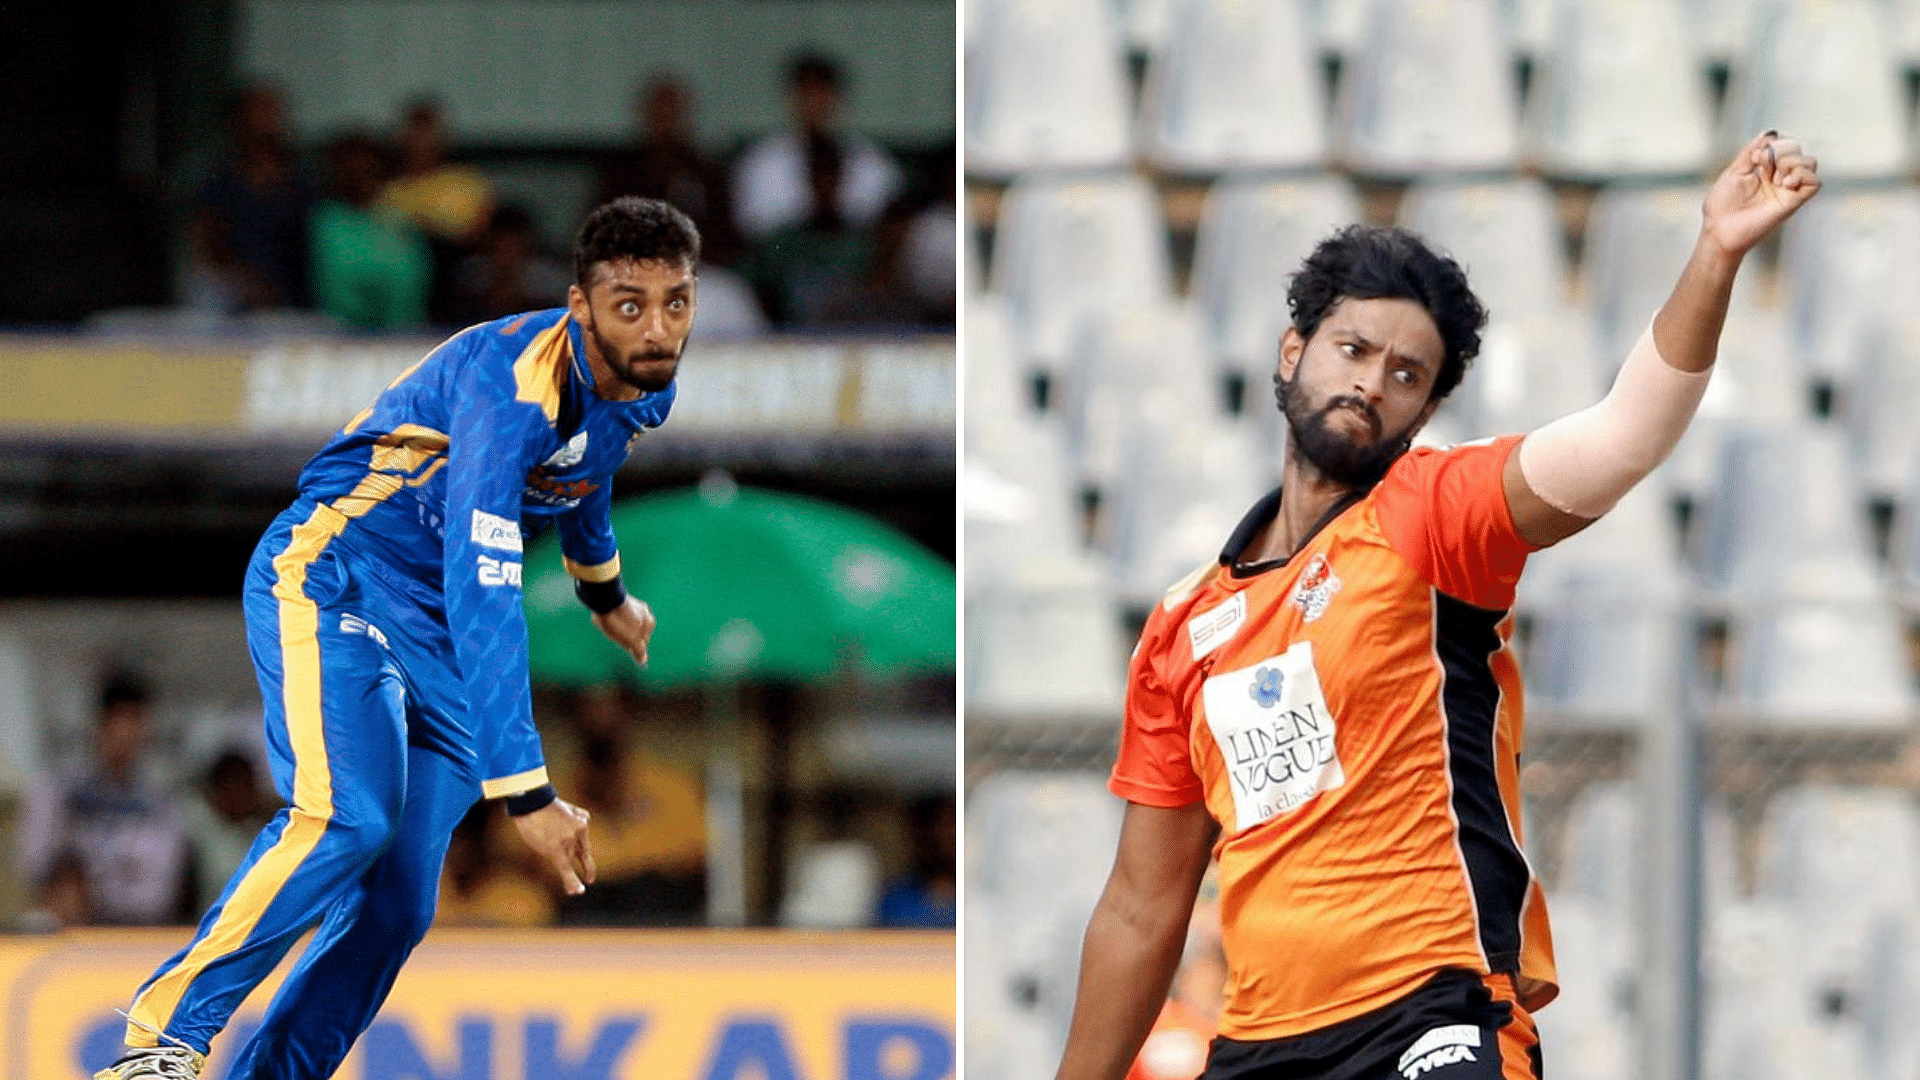 Uncapped Varun Chakravarthy and Shivam Dube fetched bumper pay-hikes at the IPL 2019 Auction.